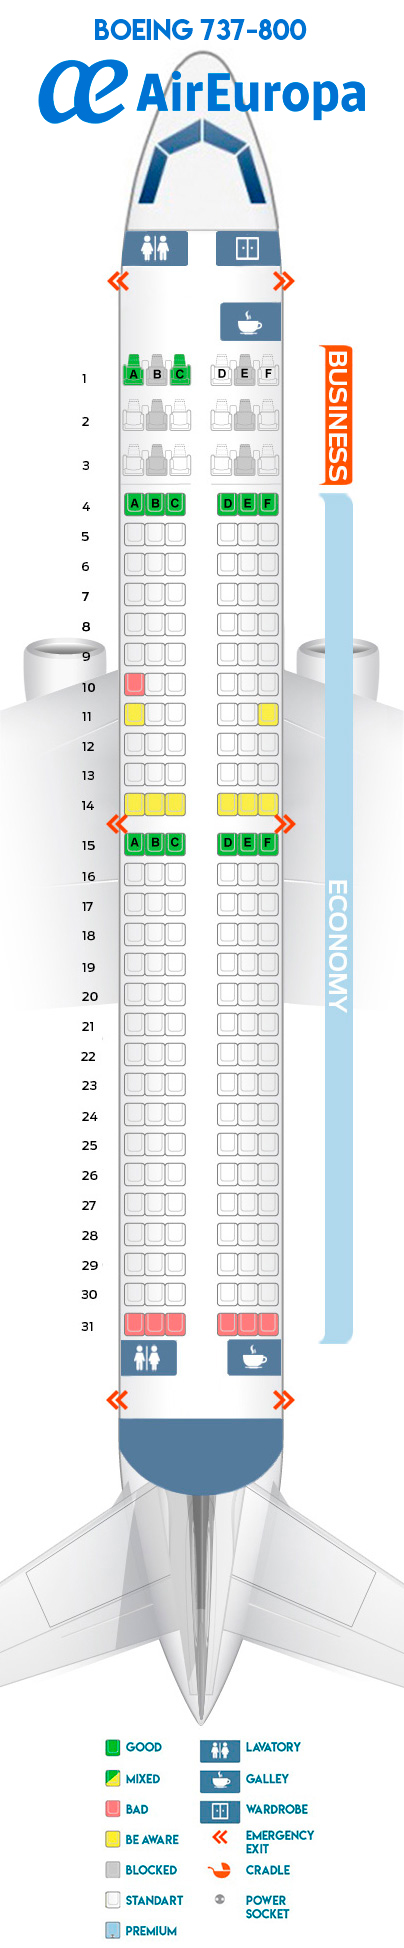 Seat Map Boeing 737 800 Air Europa Best Seats In The Plane